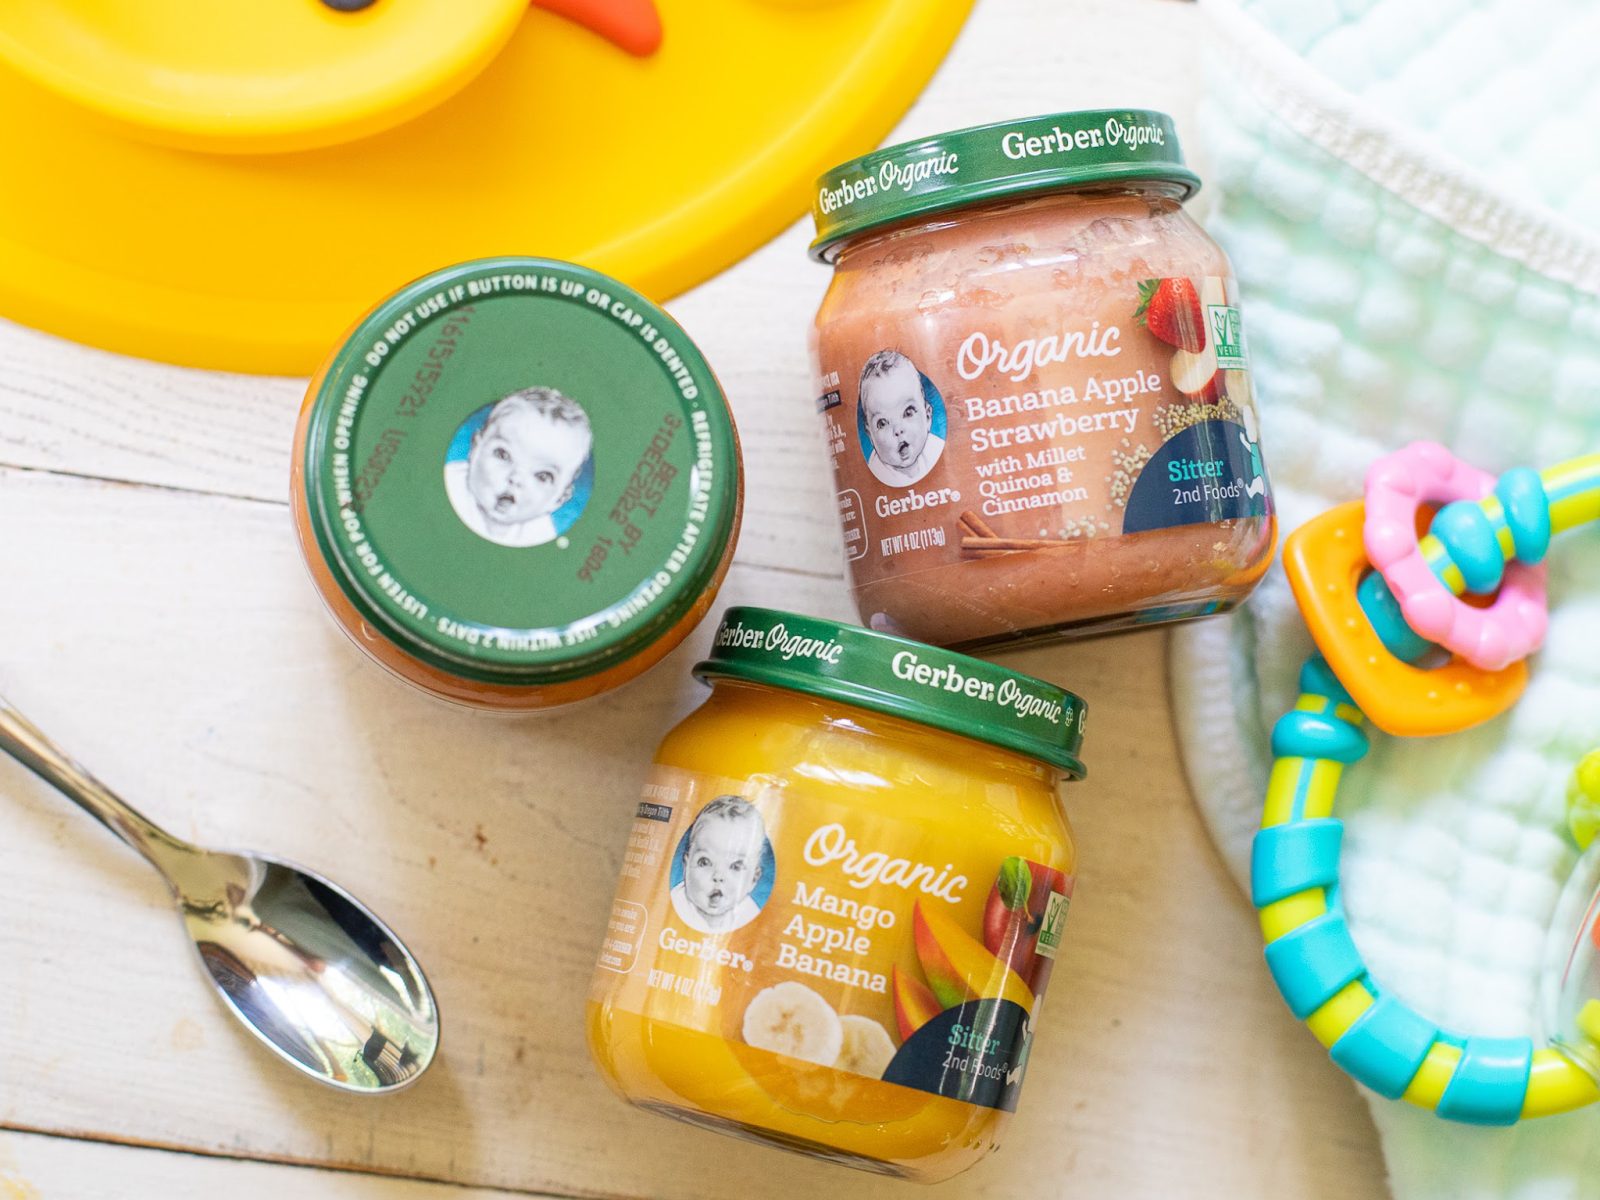 Gerber Organic Baby Food Just 50¢ At Publix – Plus 79¢ Baby Food Pouches